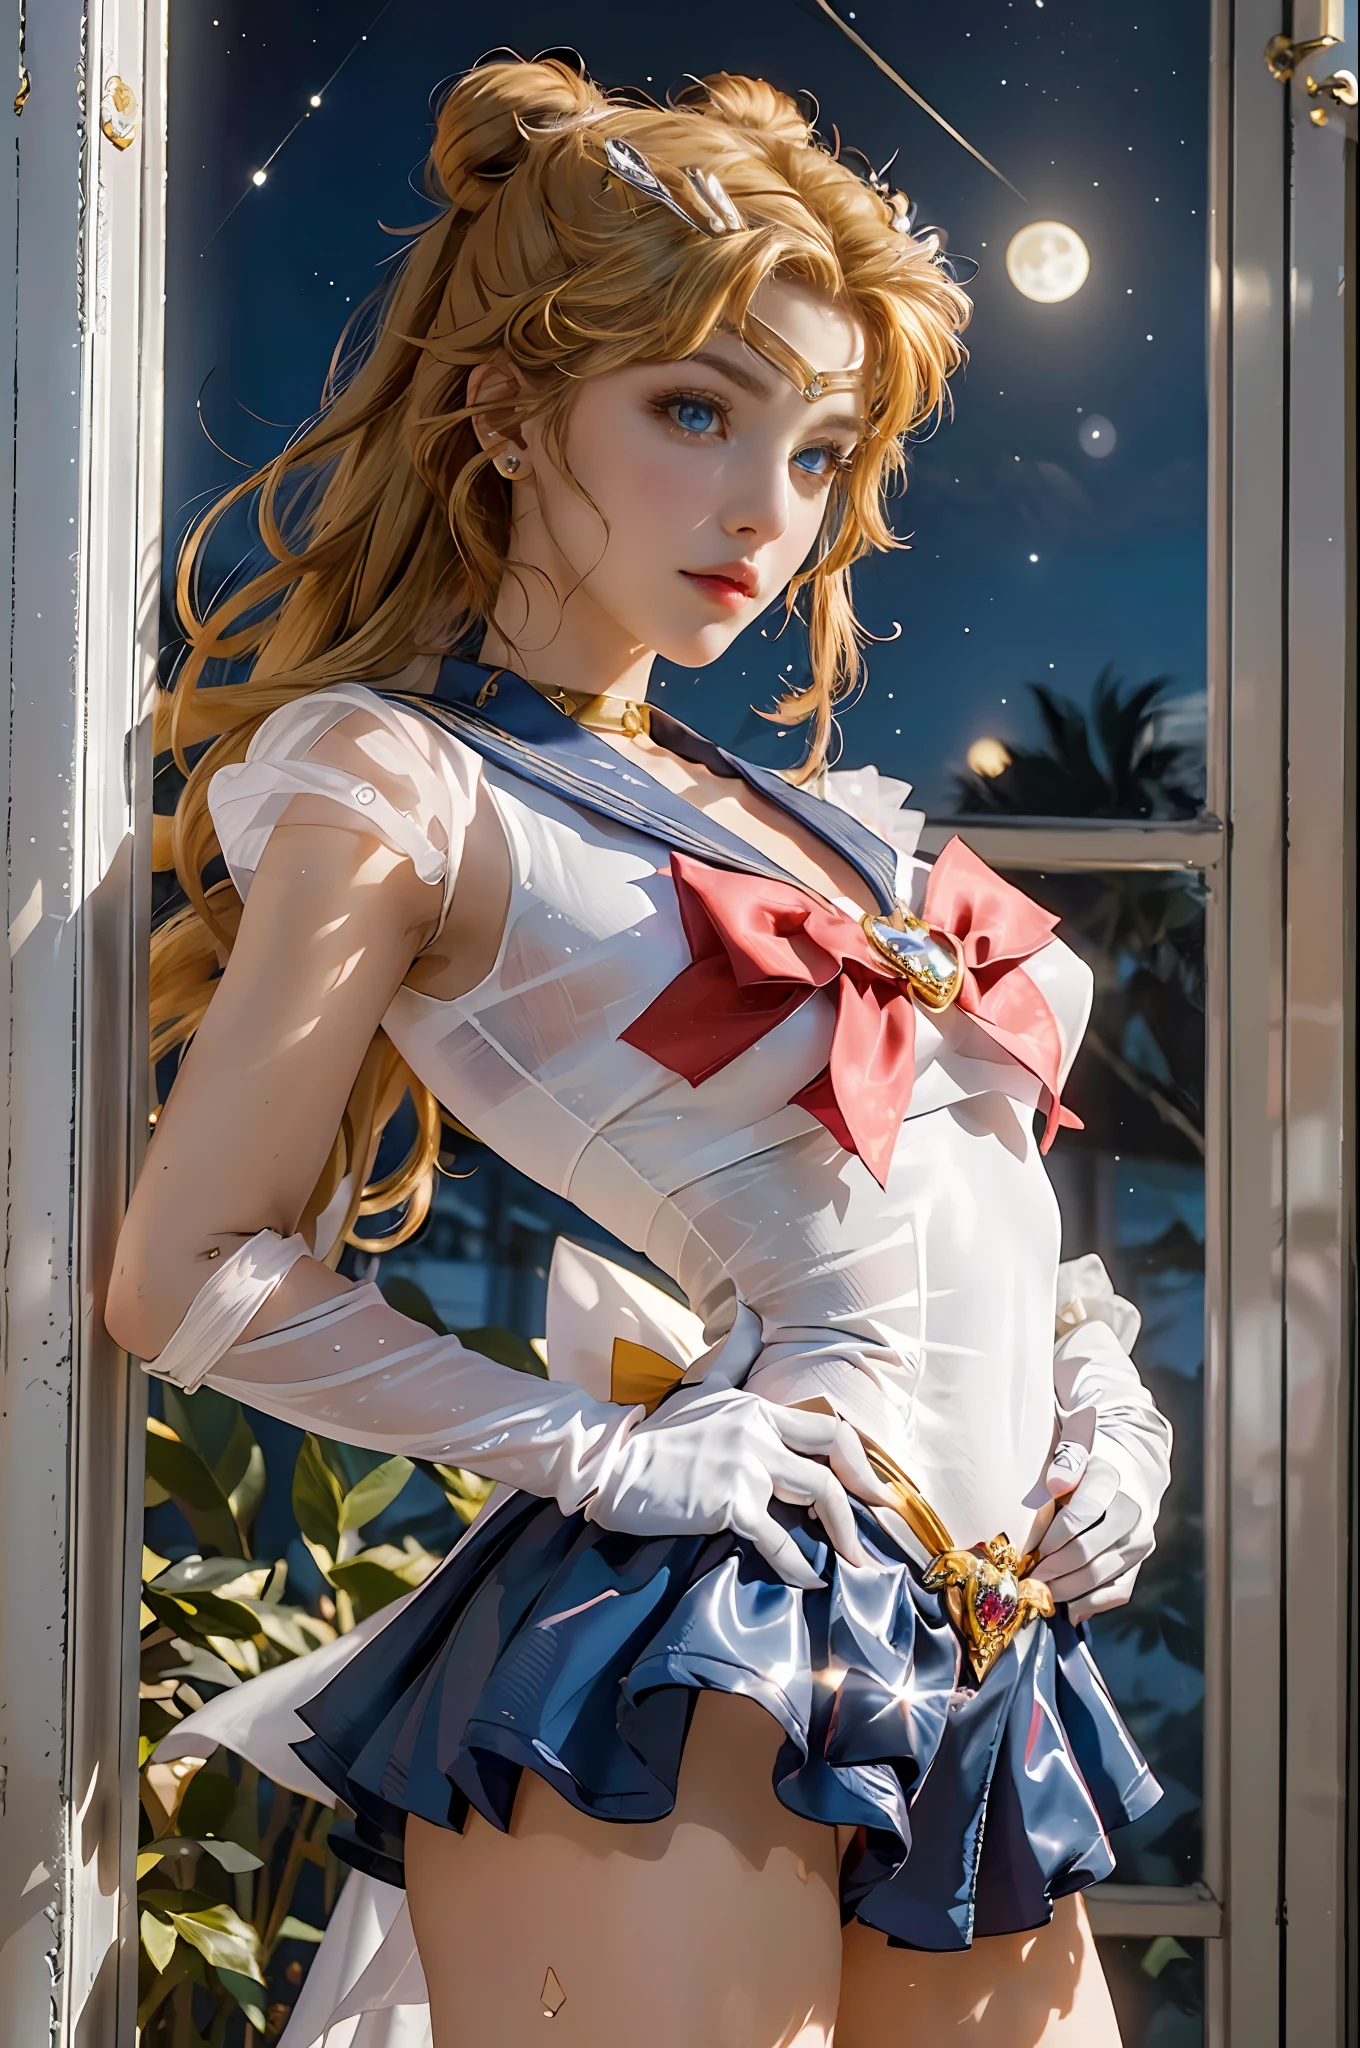 Masterpiece, Full: 1.3, Stand, 8K, 3D, Realistic, Ultra Micro Shooting, Top Quality, Extreme Detail CG Unity 8K Wallpaper, from below, intricate details, (1 female), 18 years old, (Sailor Moon supersailormoon mer1, Tiara, Sailor Senshi Uniform Sailor: 1.2, Sailor Moon: 1.2), Impossibly long bright twin-tailed blonde, hair bun, red round hair ornament in a hair bun, Sailor Senshi uniform, (blue collar, blue sailor collar, blue pre-gate miniskirt: 1.3, very large red bow on the chest, long white latex gloves, red gloves on the elbows, golden tiara, earrings), (face details: 1.5, bright blue eyes, beautiful face, beautiful eyes, shiny eyes, thin lips: 1.5, thin and sharp pale eyebrows, long dark eyelashes, double eyelashes, luxurious golden jewelry, thin, thin and muscular, small face, big breasts, perfect proportions, thin waist, sexy model pose, visible pores, seductive smile, perfect hands: 1.5, high-leg swimsuit, Very thin and fit high-gloss white holographic leather, octane rendering, very dramatic images, strong natural light, sunlight, exquisite lighting and shadows, dynamic angle, DSLR, sharp focus: 1.0, maximum clarity and sharpness, (space background, moonlight, moon, dynamic background, detailed background)